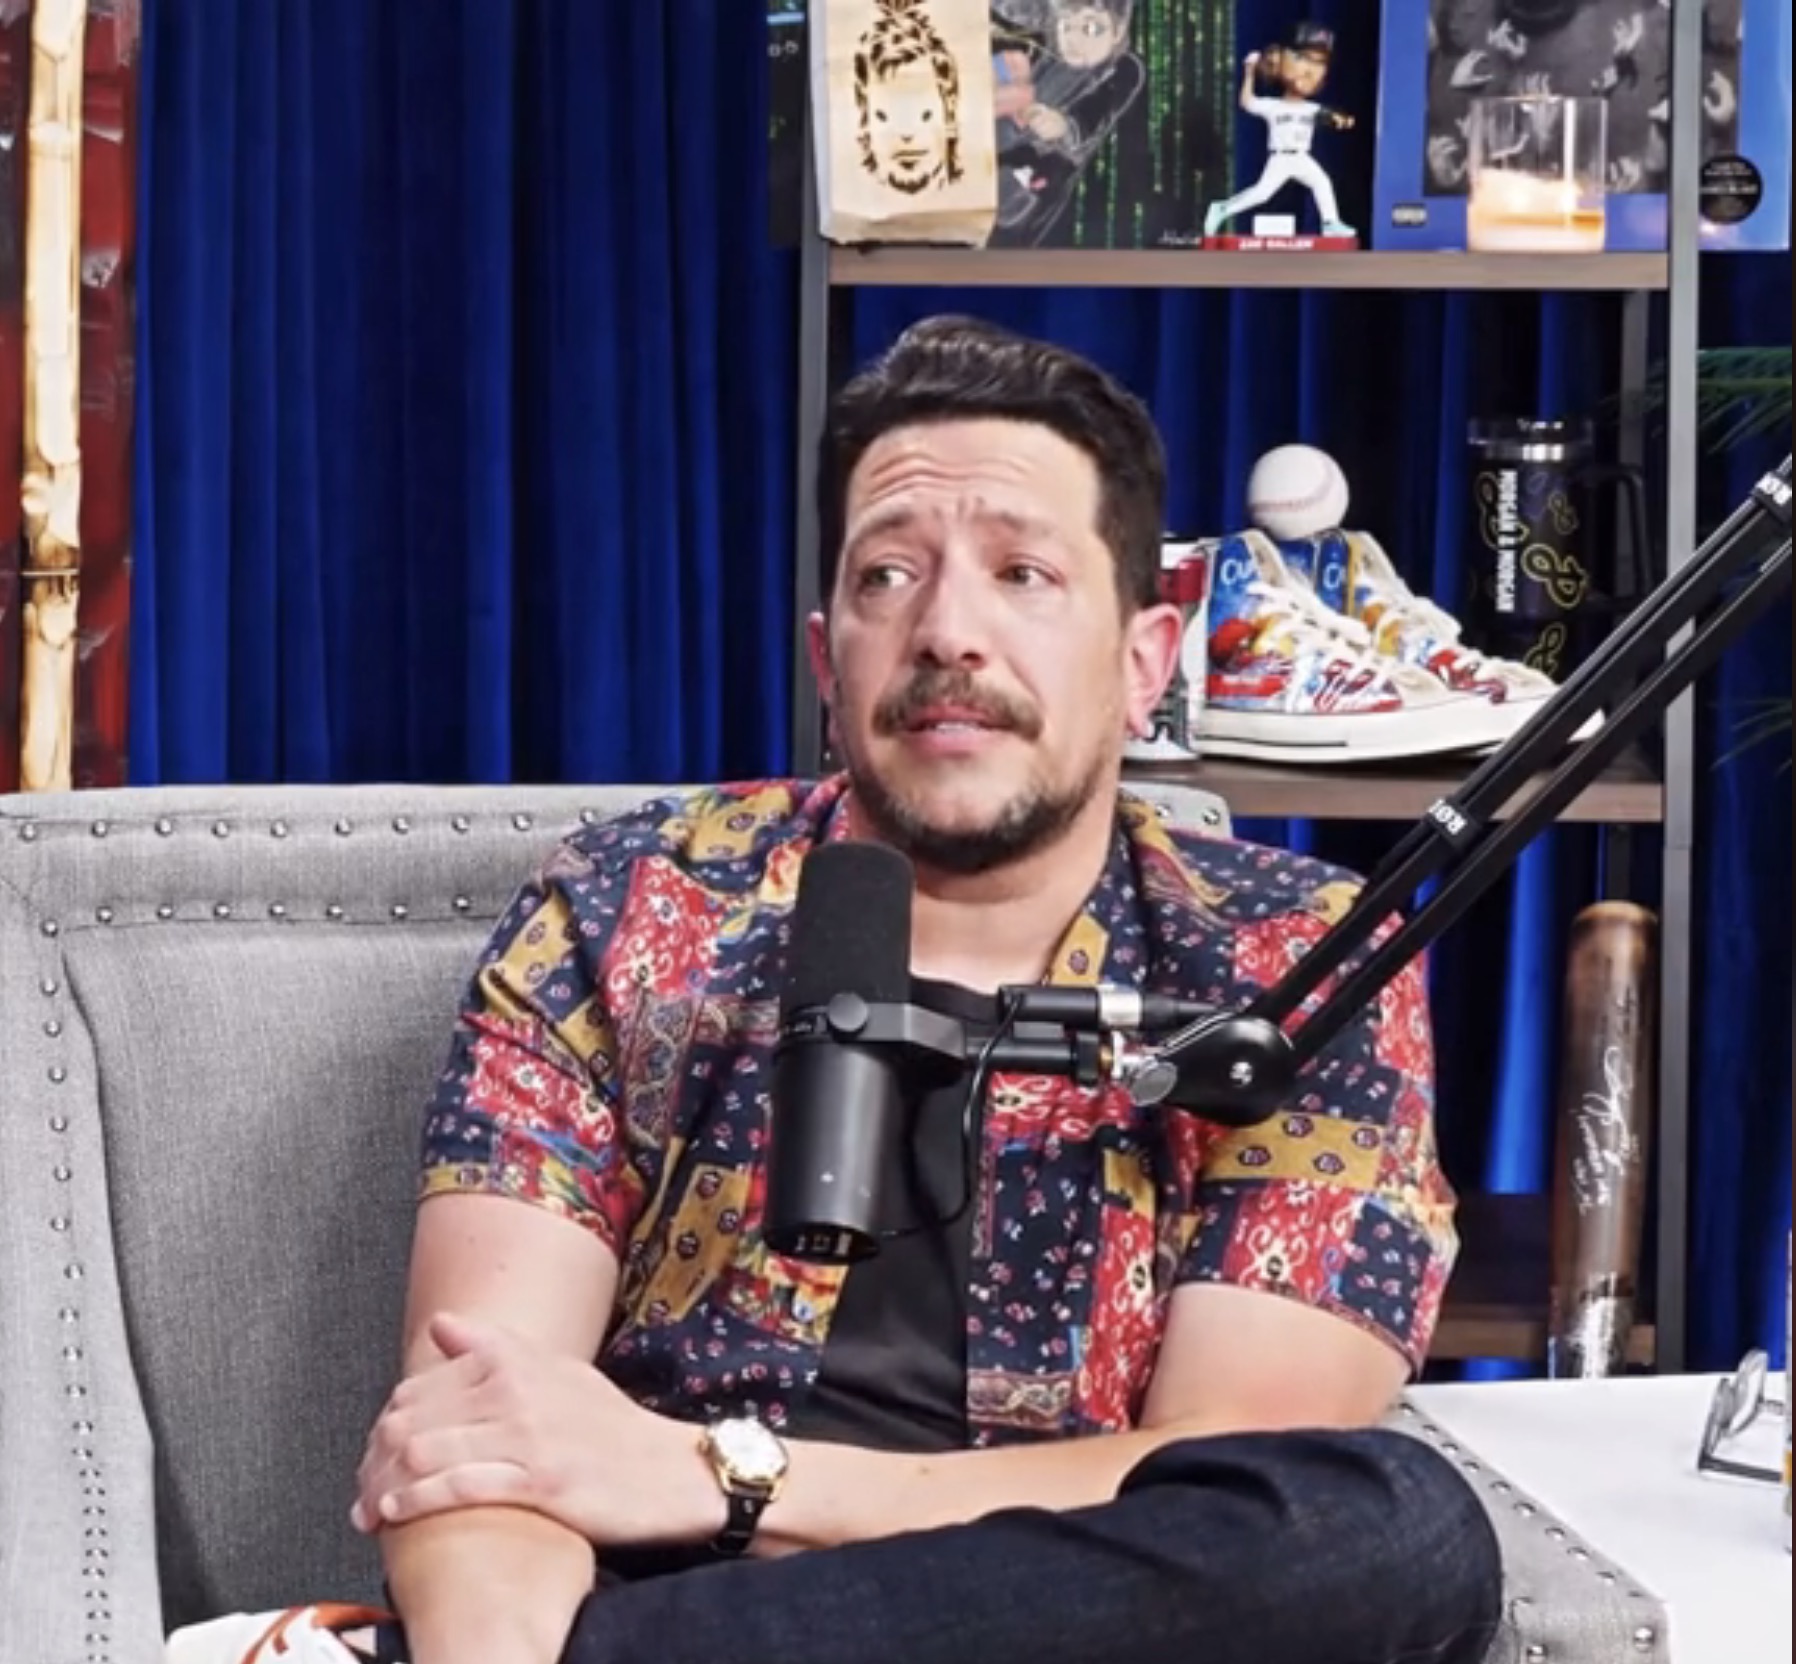 Sal broke down in tears when talking about his daughters